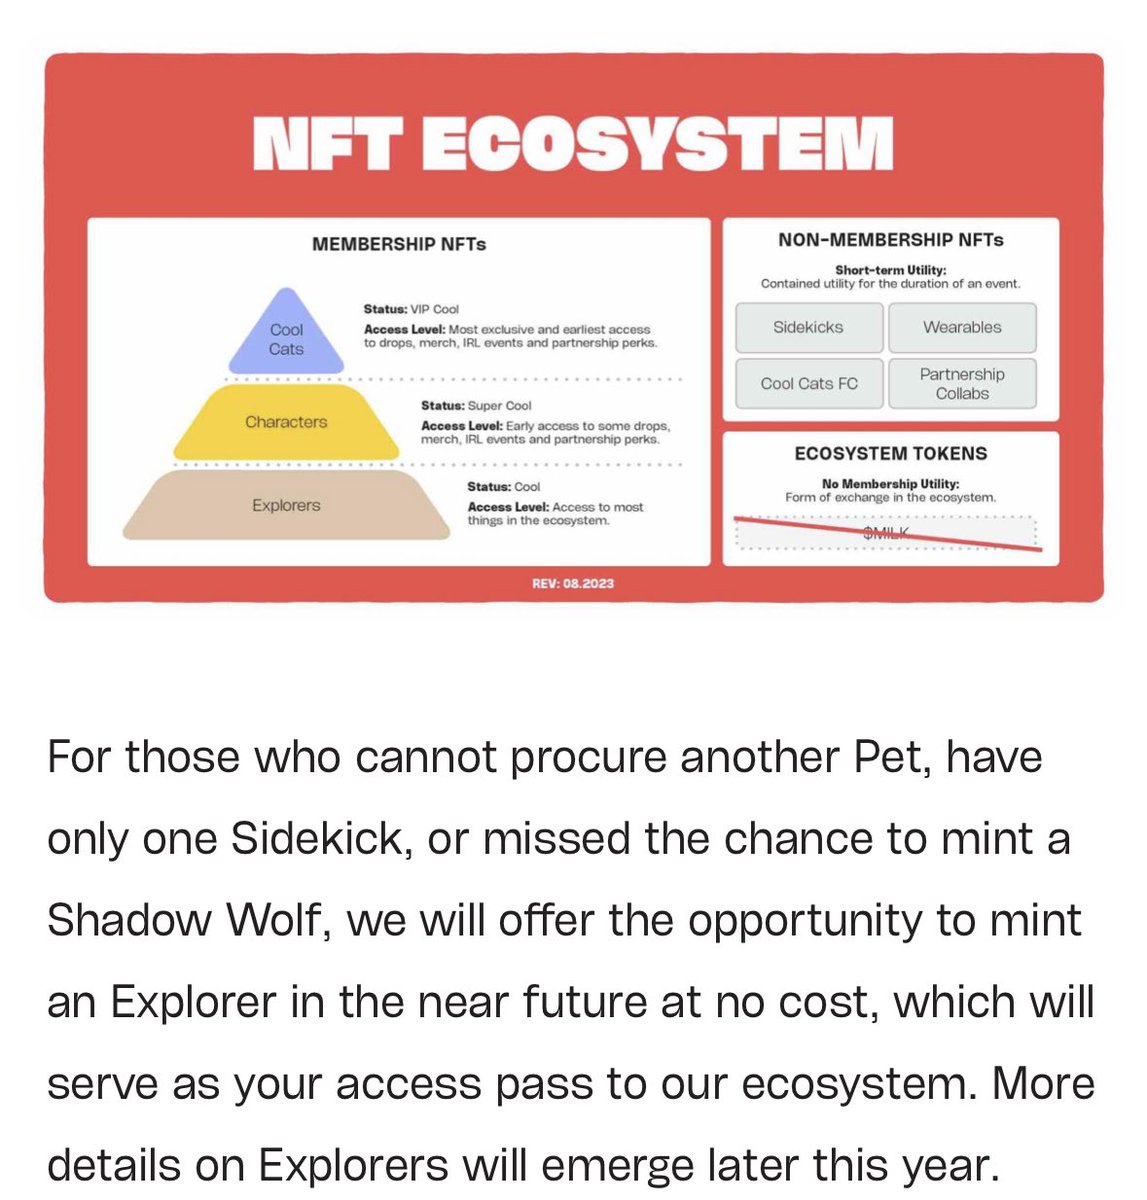 Singular Cool Pets Will become Explorers (free mint) As part of Evolution Those are membership NFTs TLDR: CP are not cancelled, read the lite paper clearly folks! 🫡👀💛 @coolcats